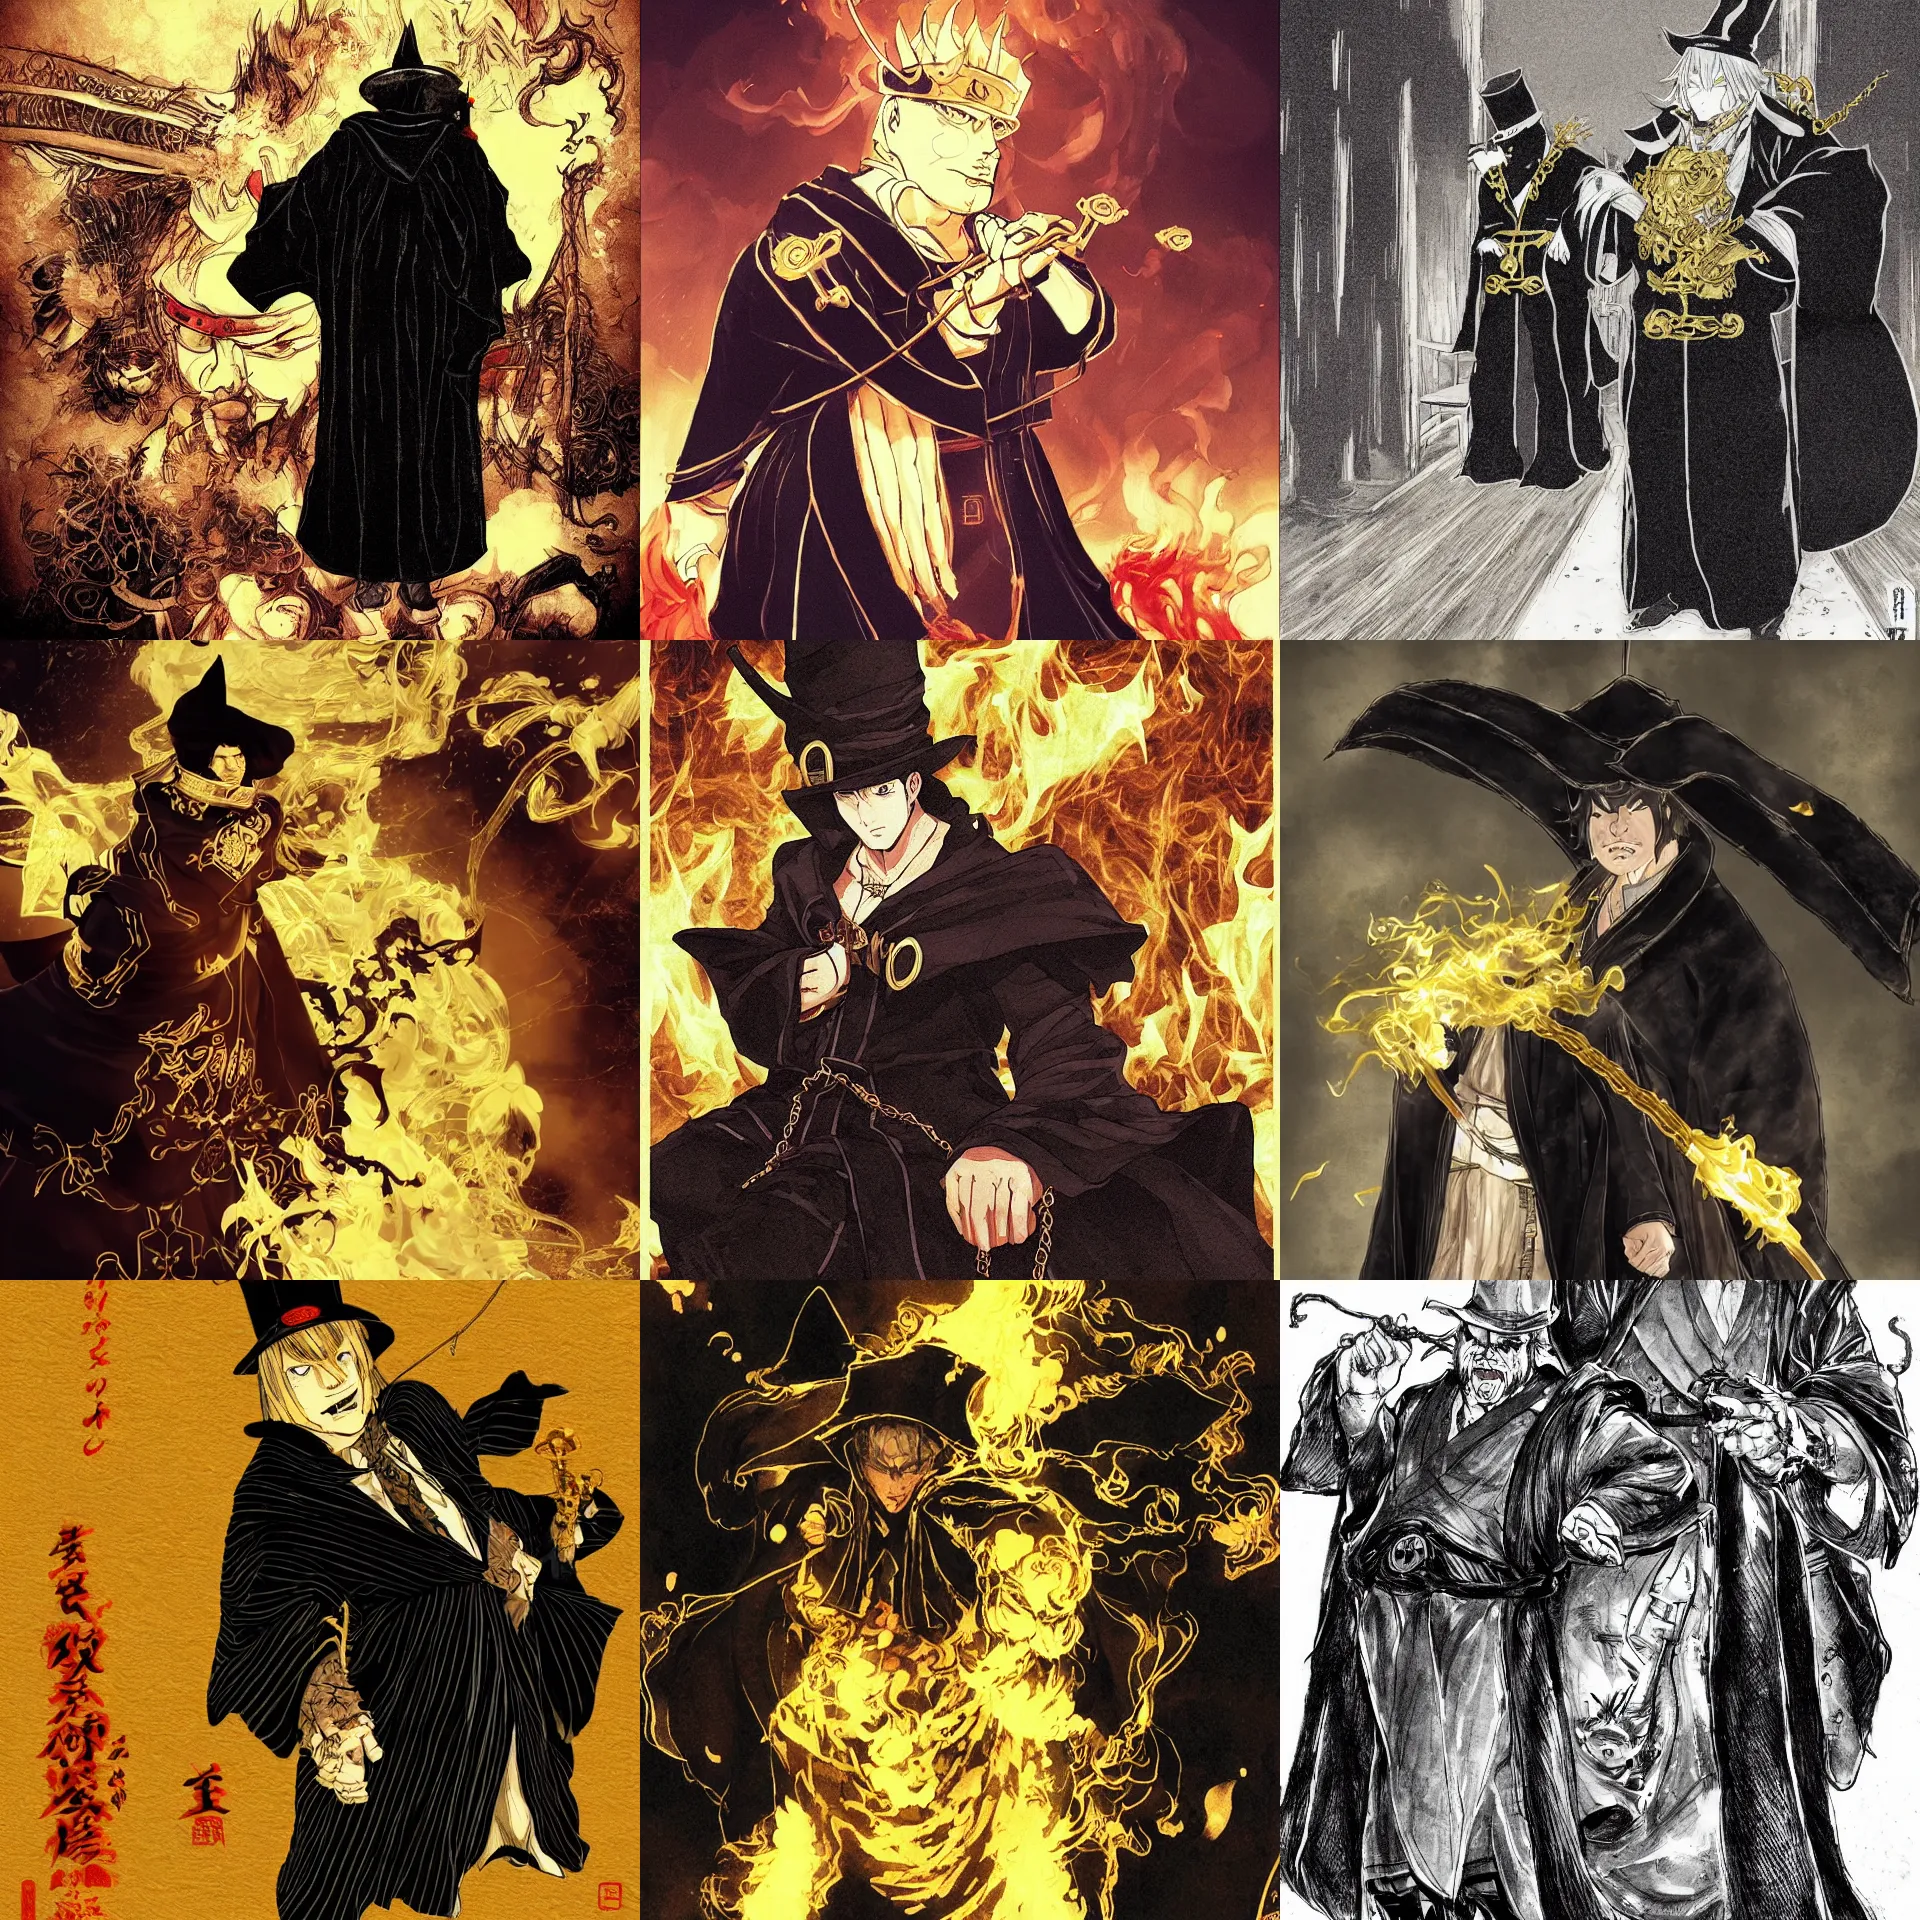 Prompt: dressed in black robes and high hats, robes with golden characters, fat, fierce - looking, devilish, eyes, big red eyes, shackles in his hands, surrounded by this fine golden smoke akihiko yoshida